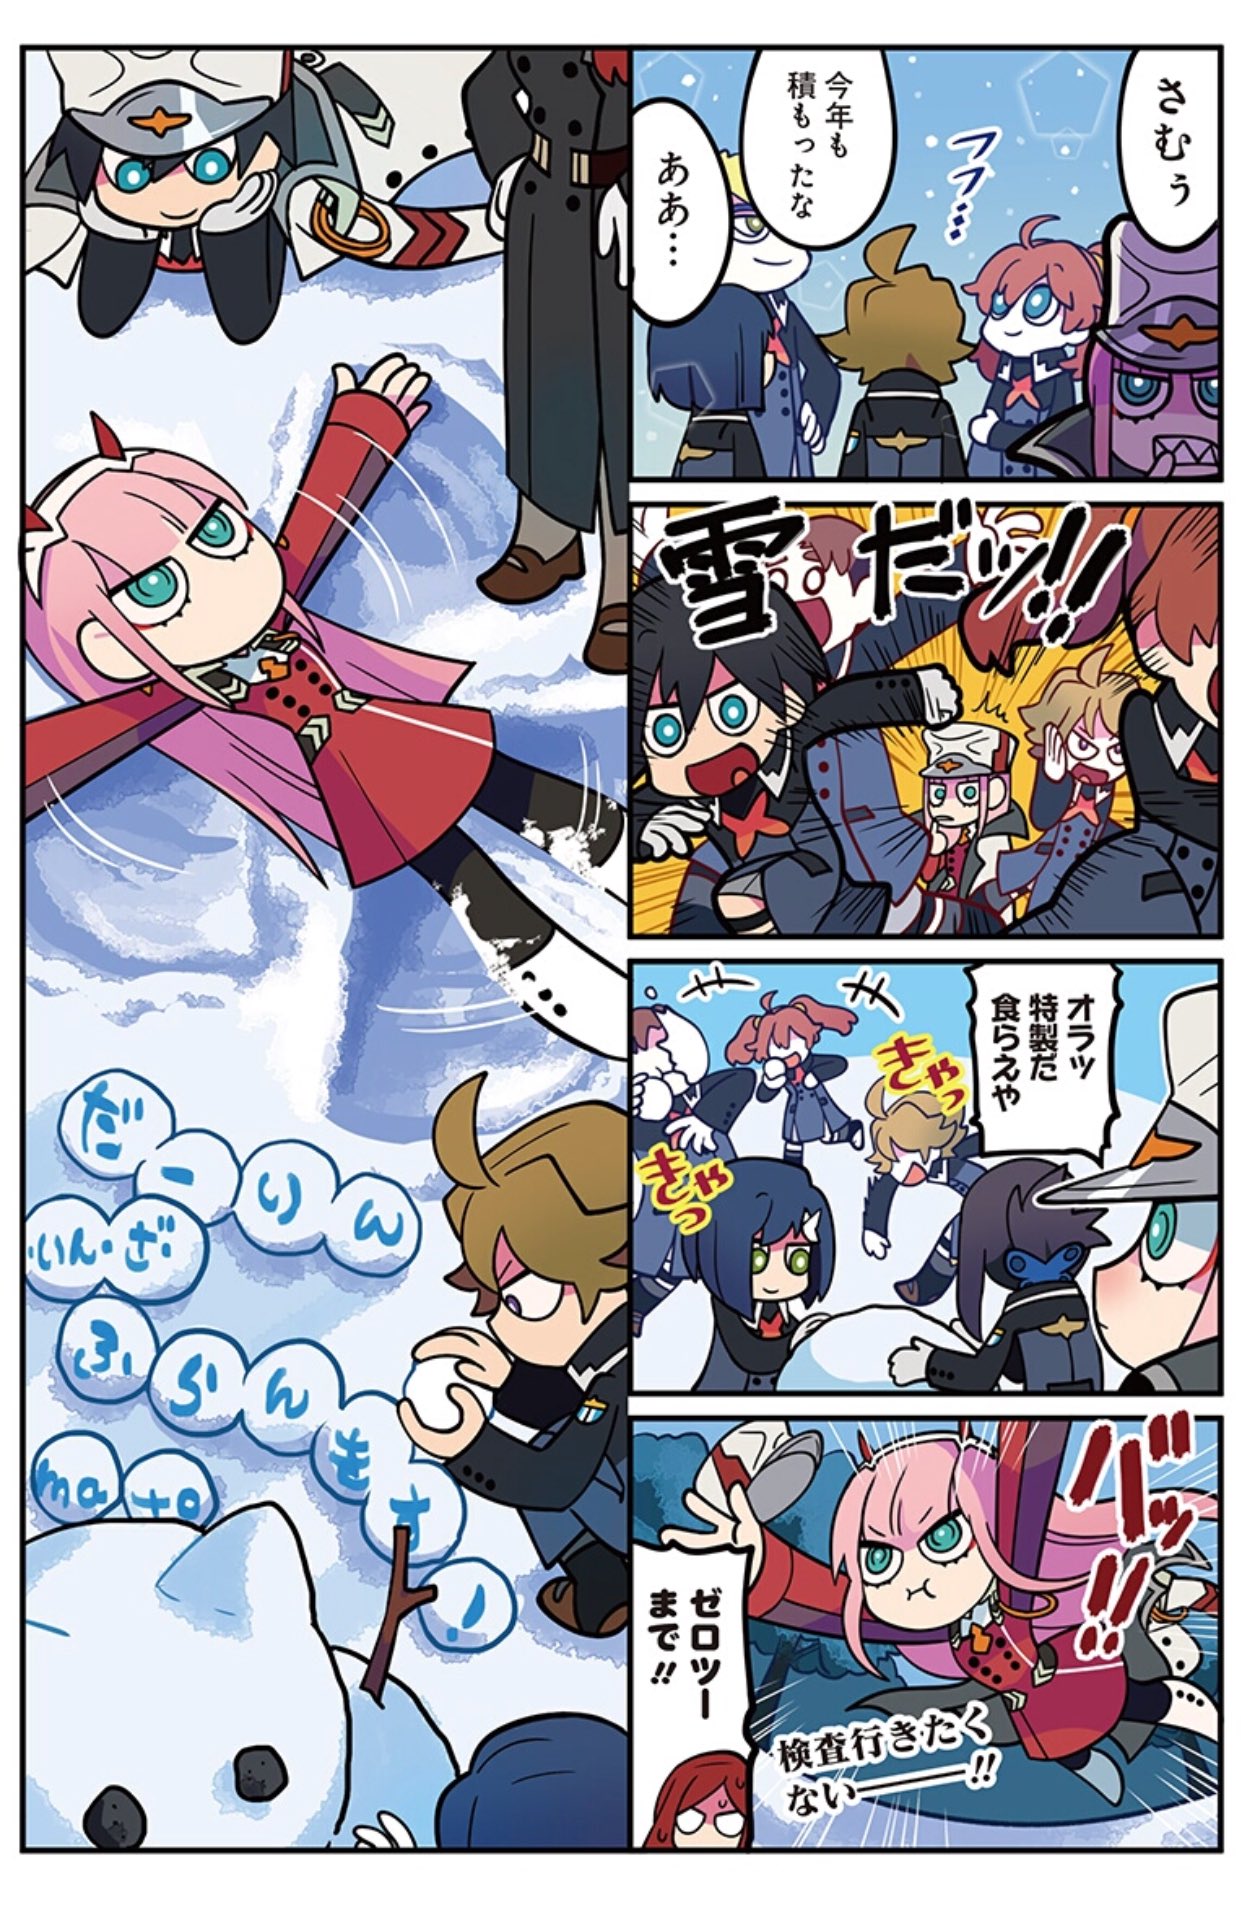 4boys 4koma 5girls ahoge artist_name black_hair blue_eyes blue_hair breasts bright_pupils brown_hair coat comic copyright_name darling_in_the_franxx futoshi_(darling_in_the_franxx) gorou_(darling_in_the_franxx) green_eyes hat highres hiro_(darling_in_the_franxx) ichigo_(darling_in_the_franxx) mato_(mozu_hayanie) miku_(darling_in_the_franxx) multiple_boys multiple_girls nana_(darling_in_the_franxx) no_mouth peaked_cap running shorts smile snow_angel snowball snowman throwing translation_request twintails zero_two_(darling_in_the_franxx) zorome_(darling_in_the_franxx)